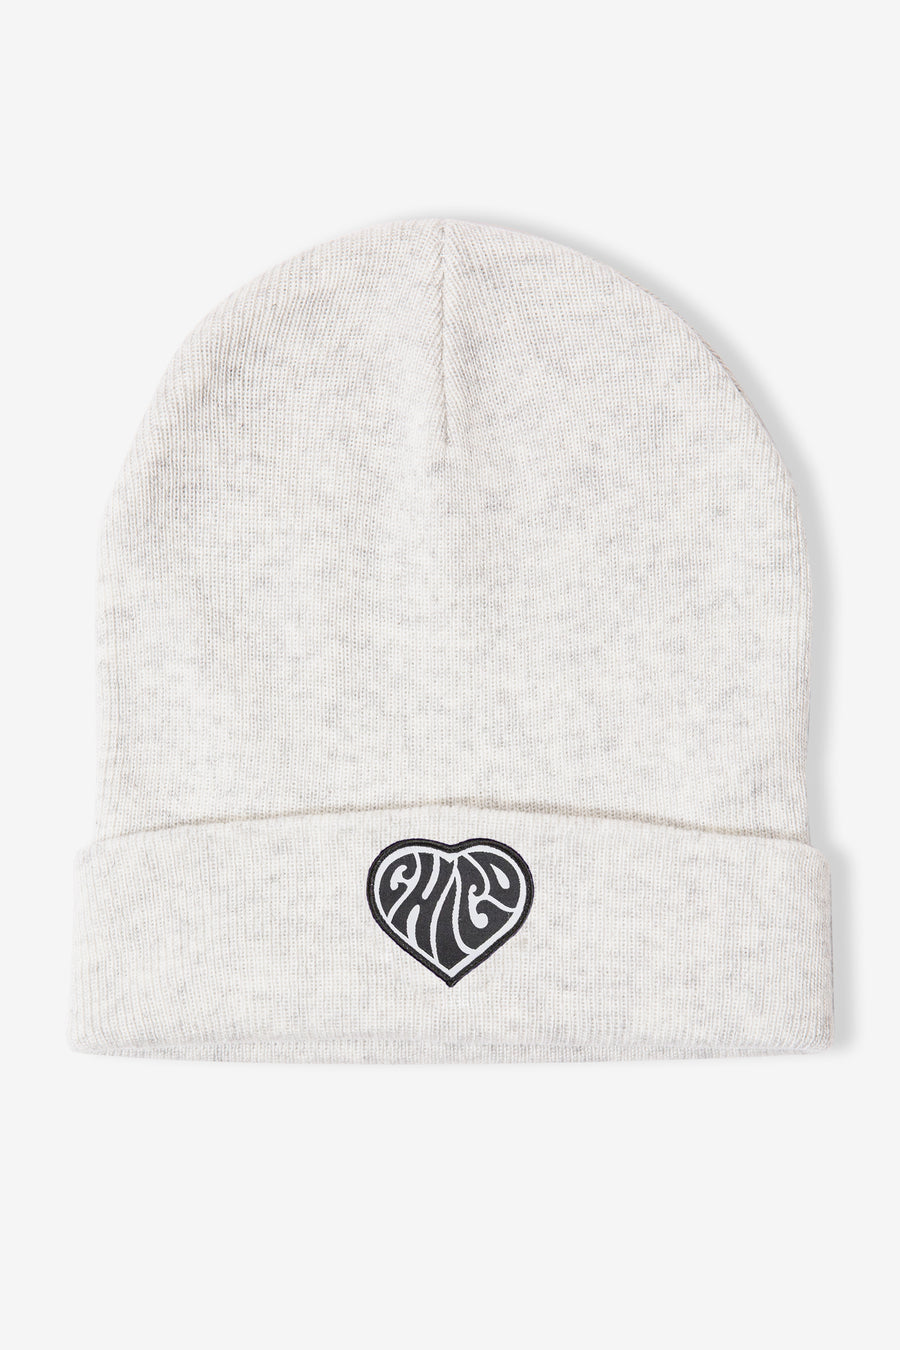 Psychedelic Chico Cuff Beanie